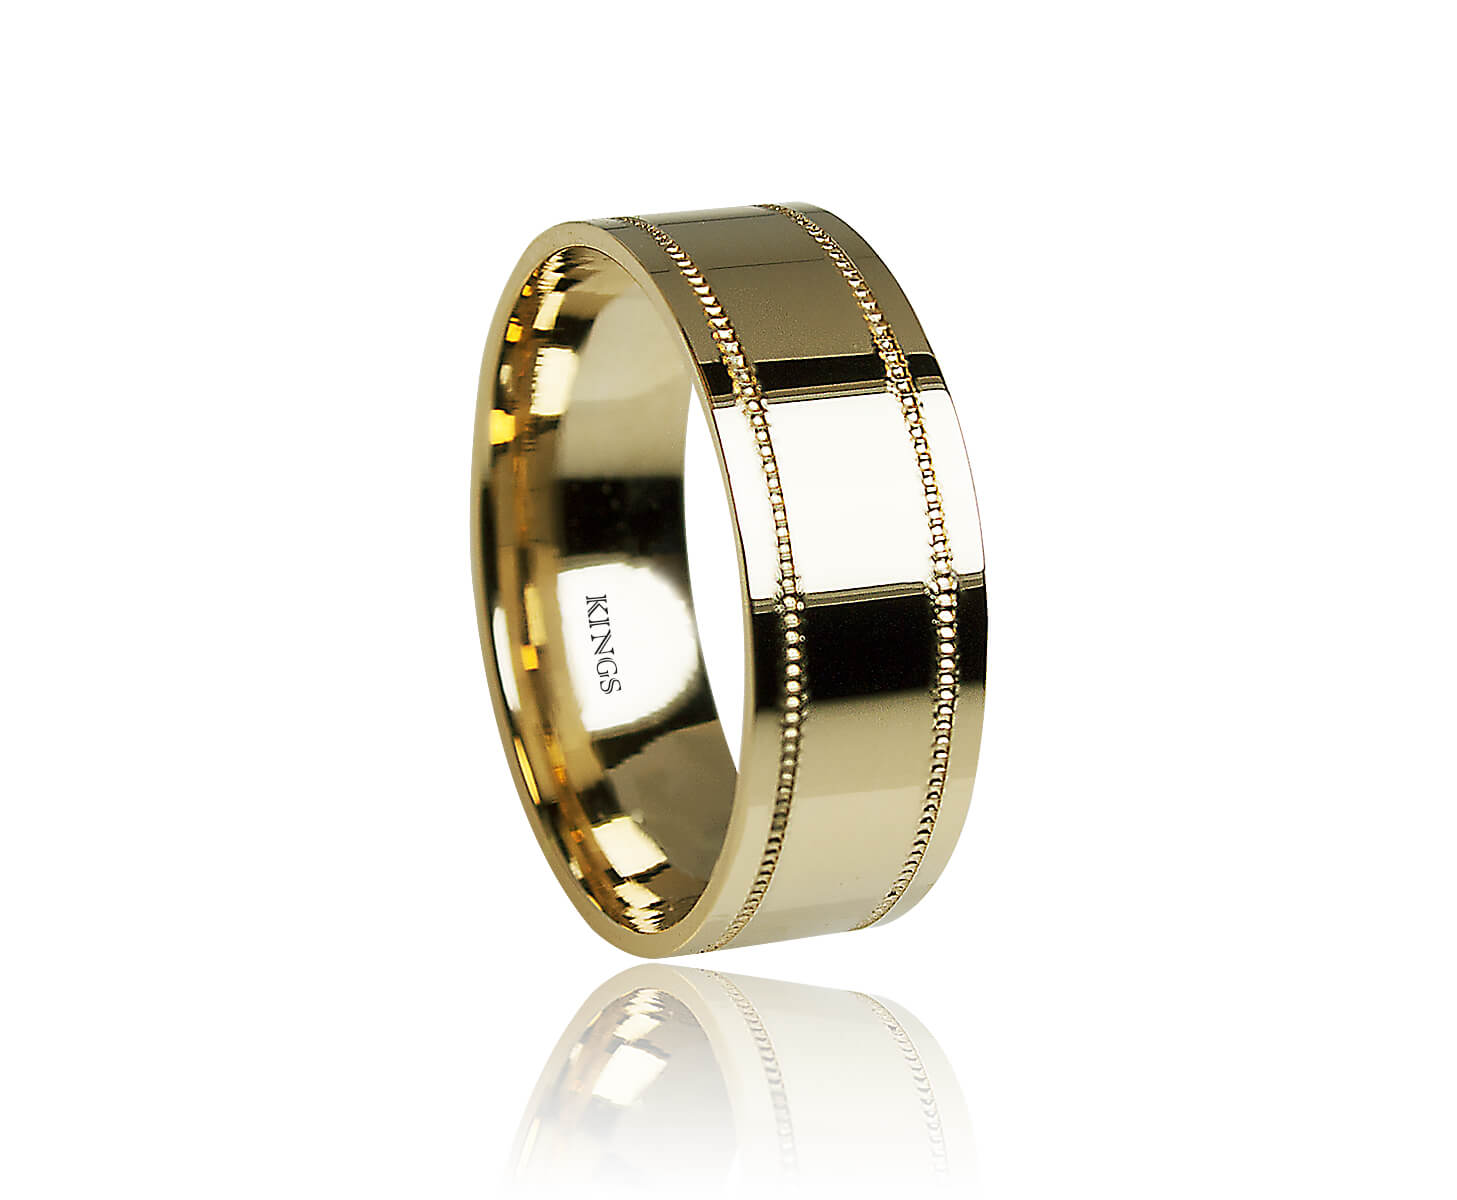 Mens Gold Ring 18K yellow Gold with knurling lines 7mm Ring by Kings